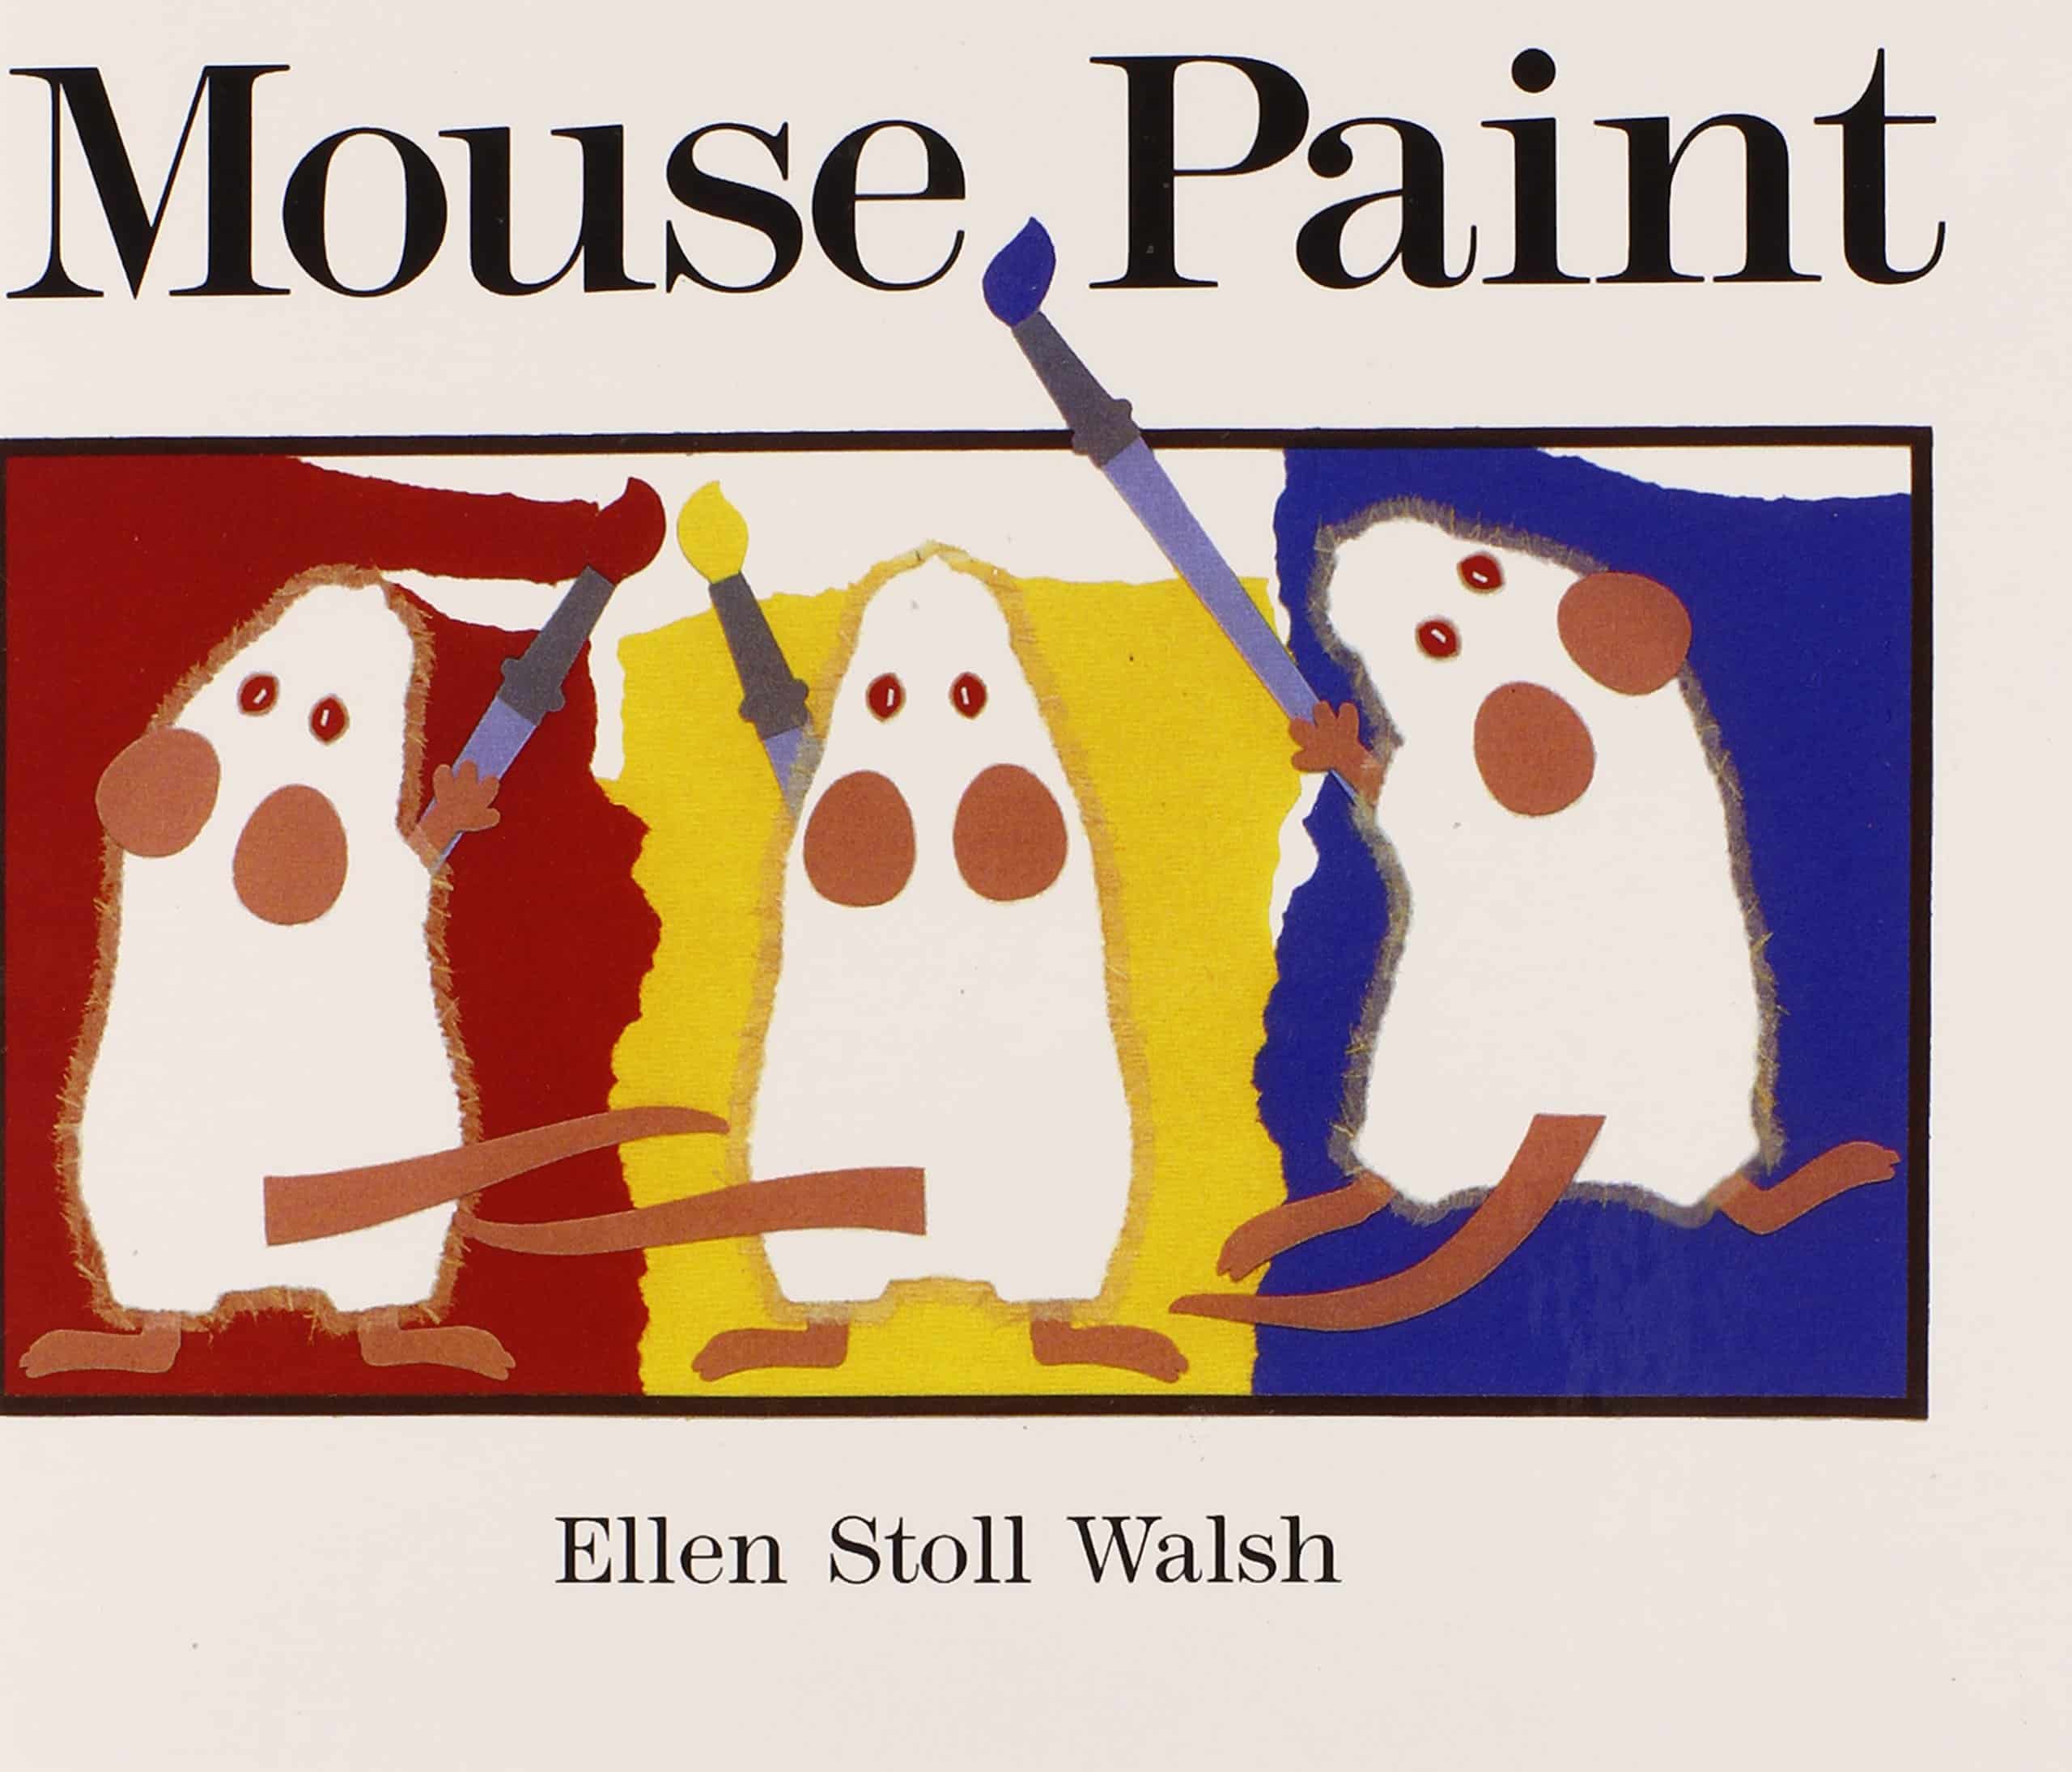 The cover for the book Mouse Paint